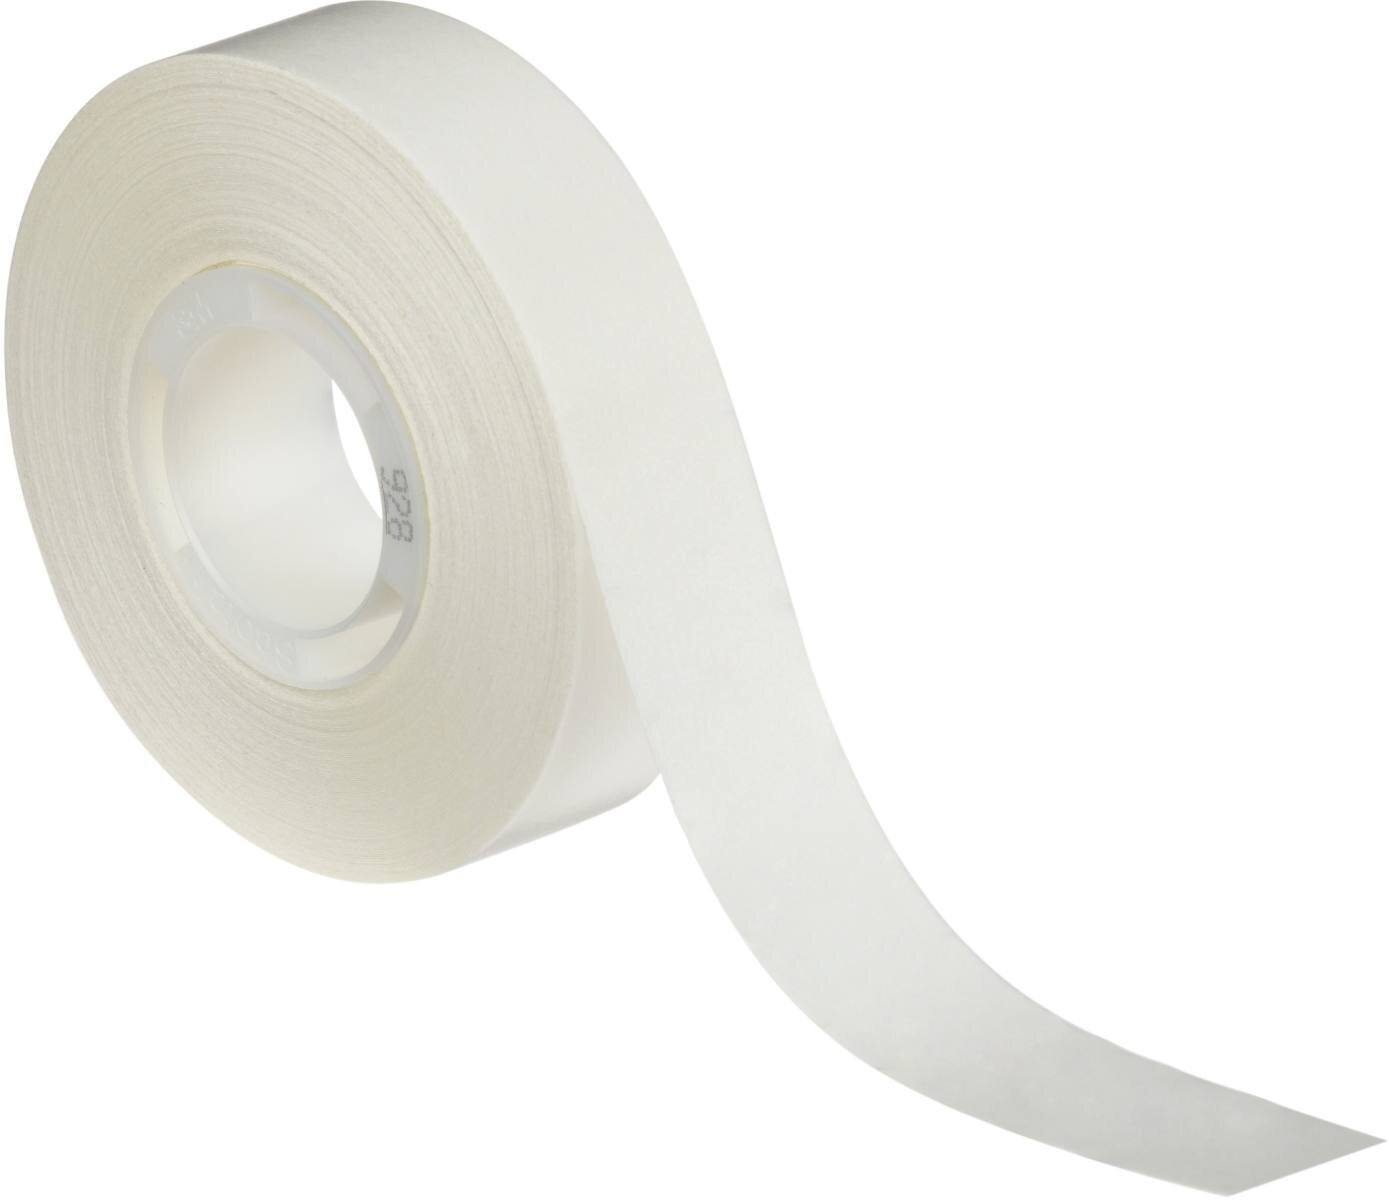 3M™ Removable Repositionable Tape 665